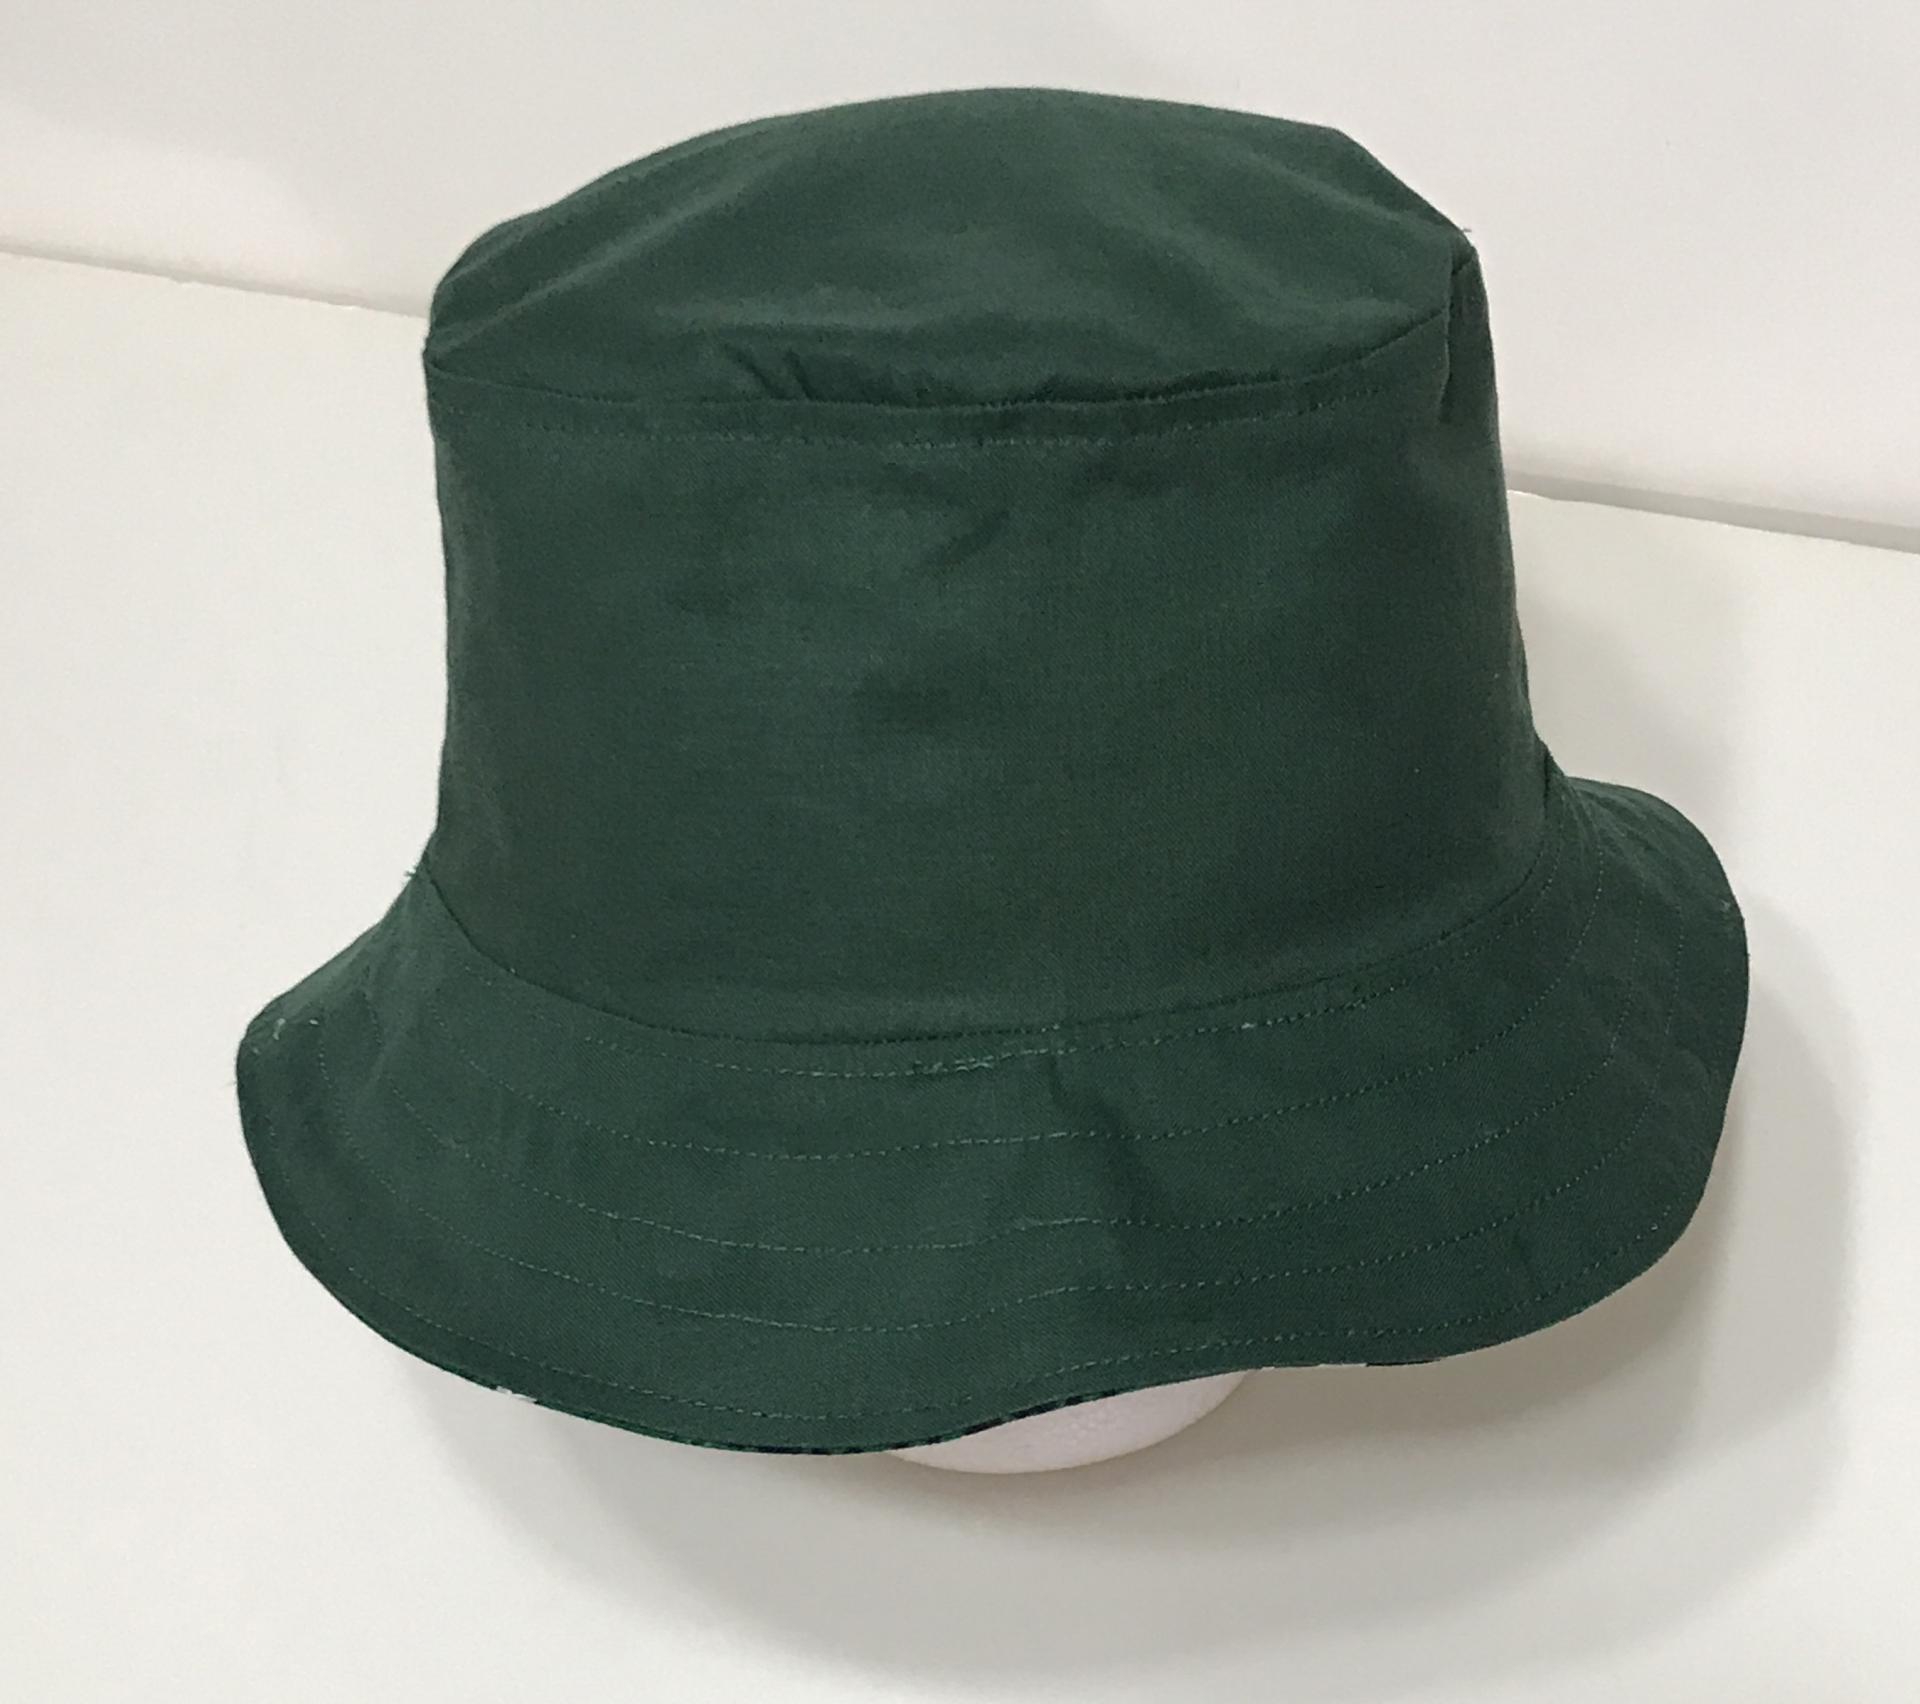 Hat reversed to show solid green on the other side.